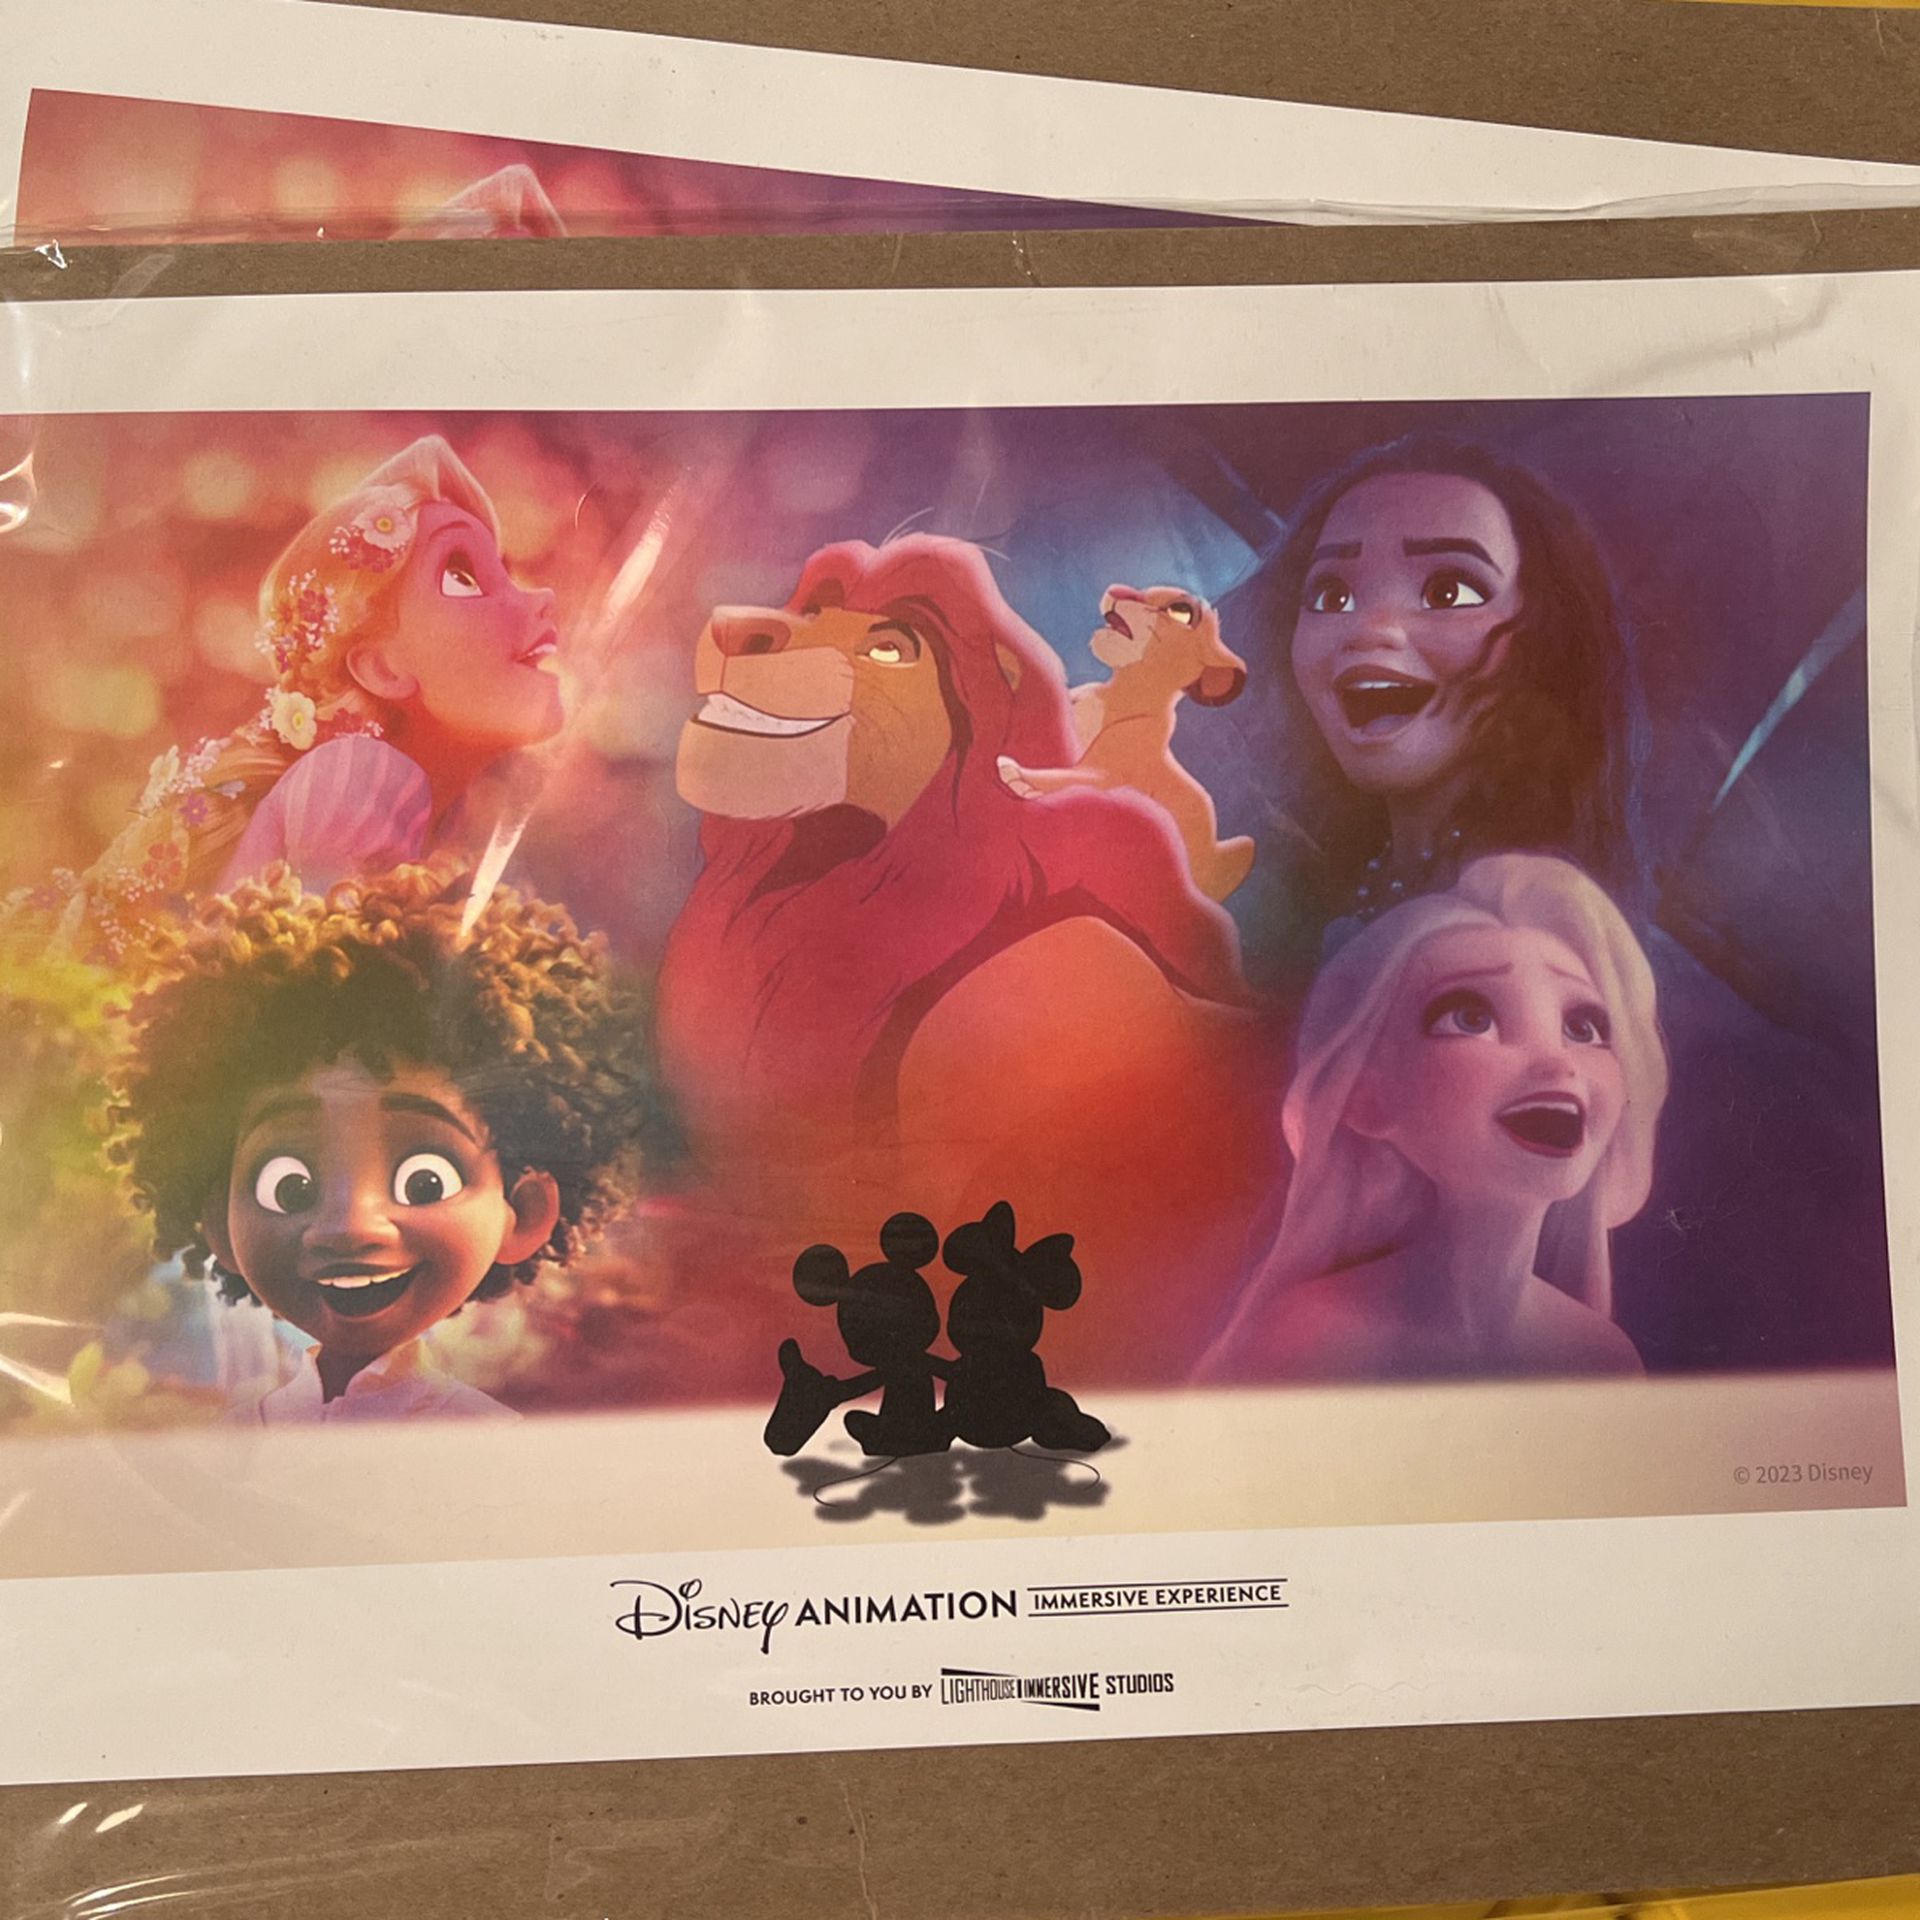 Disney Animation Immersive Experience Poster 